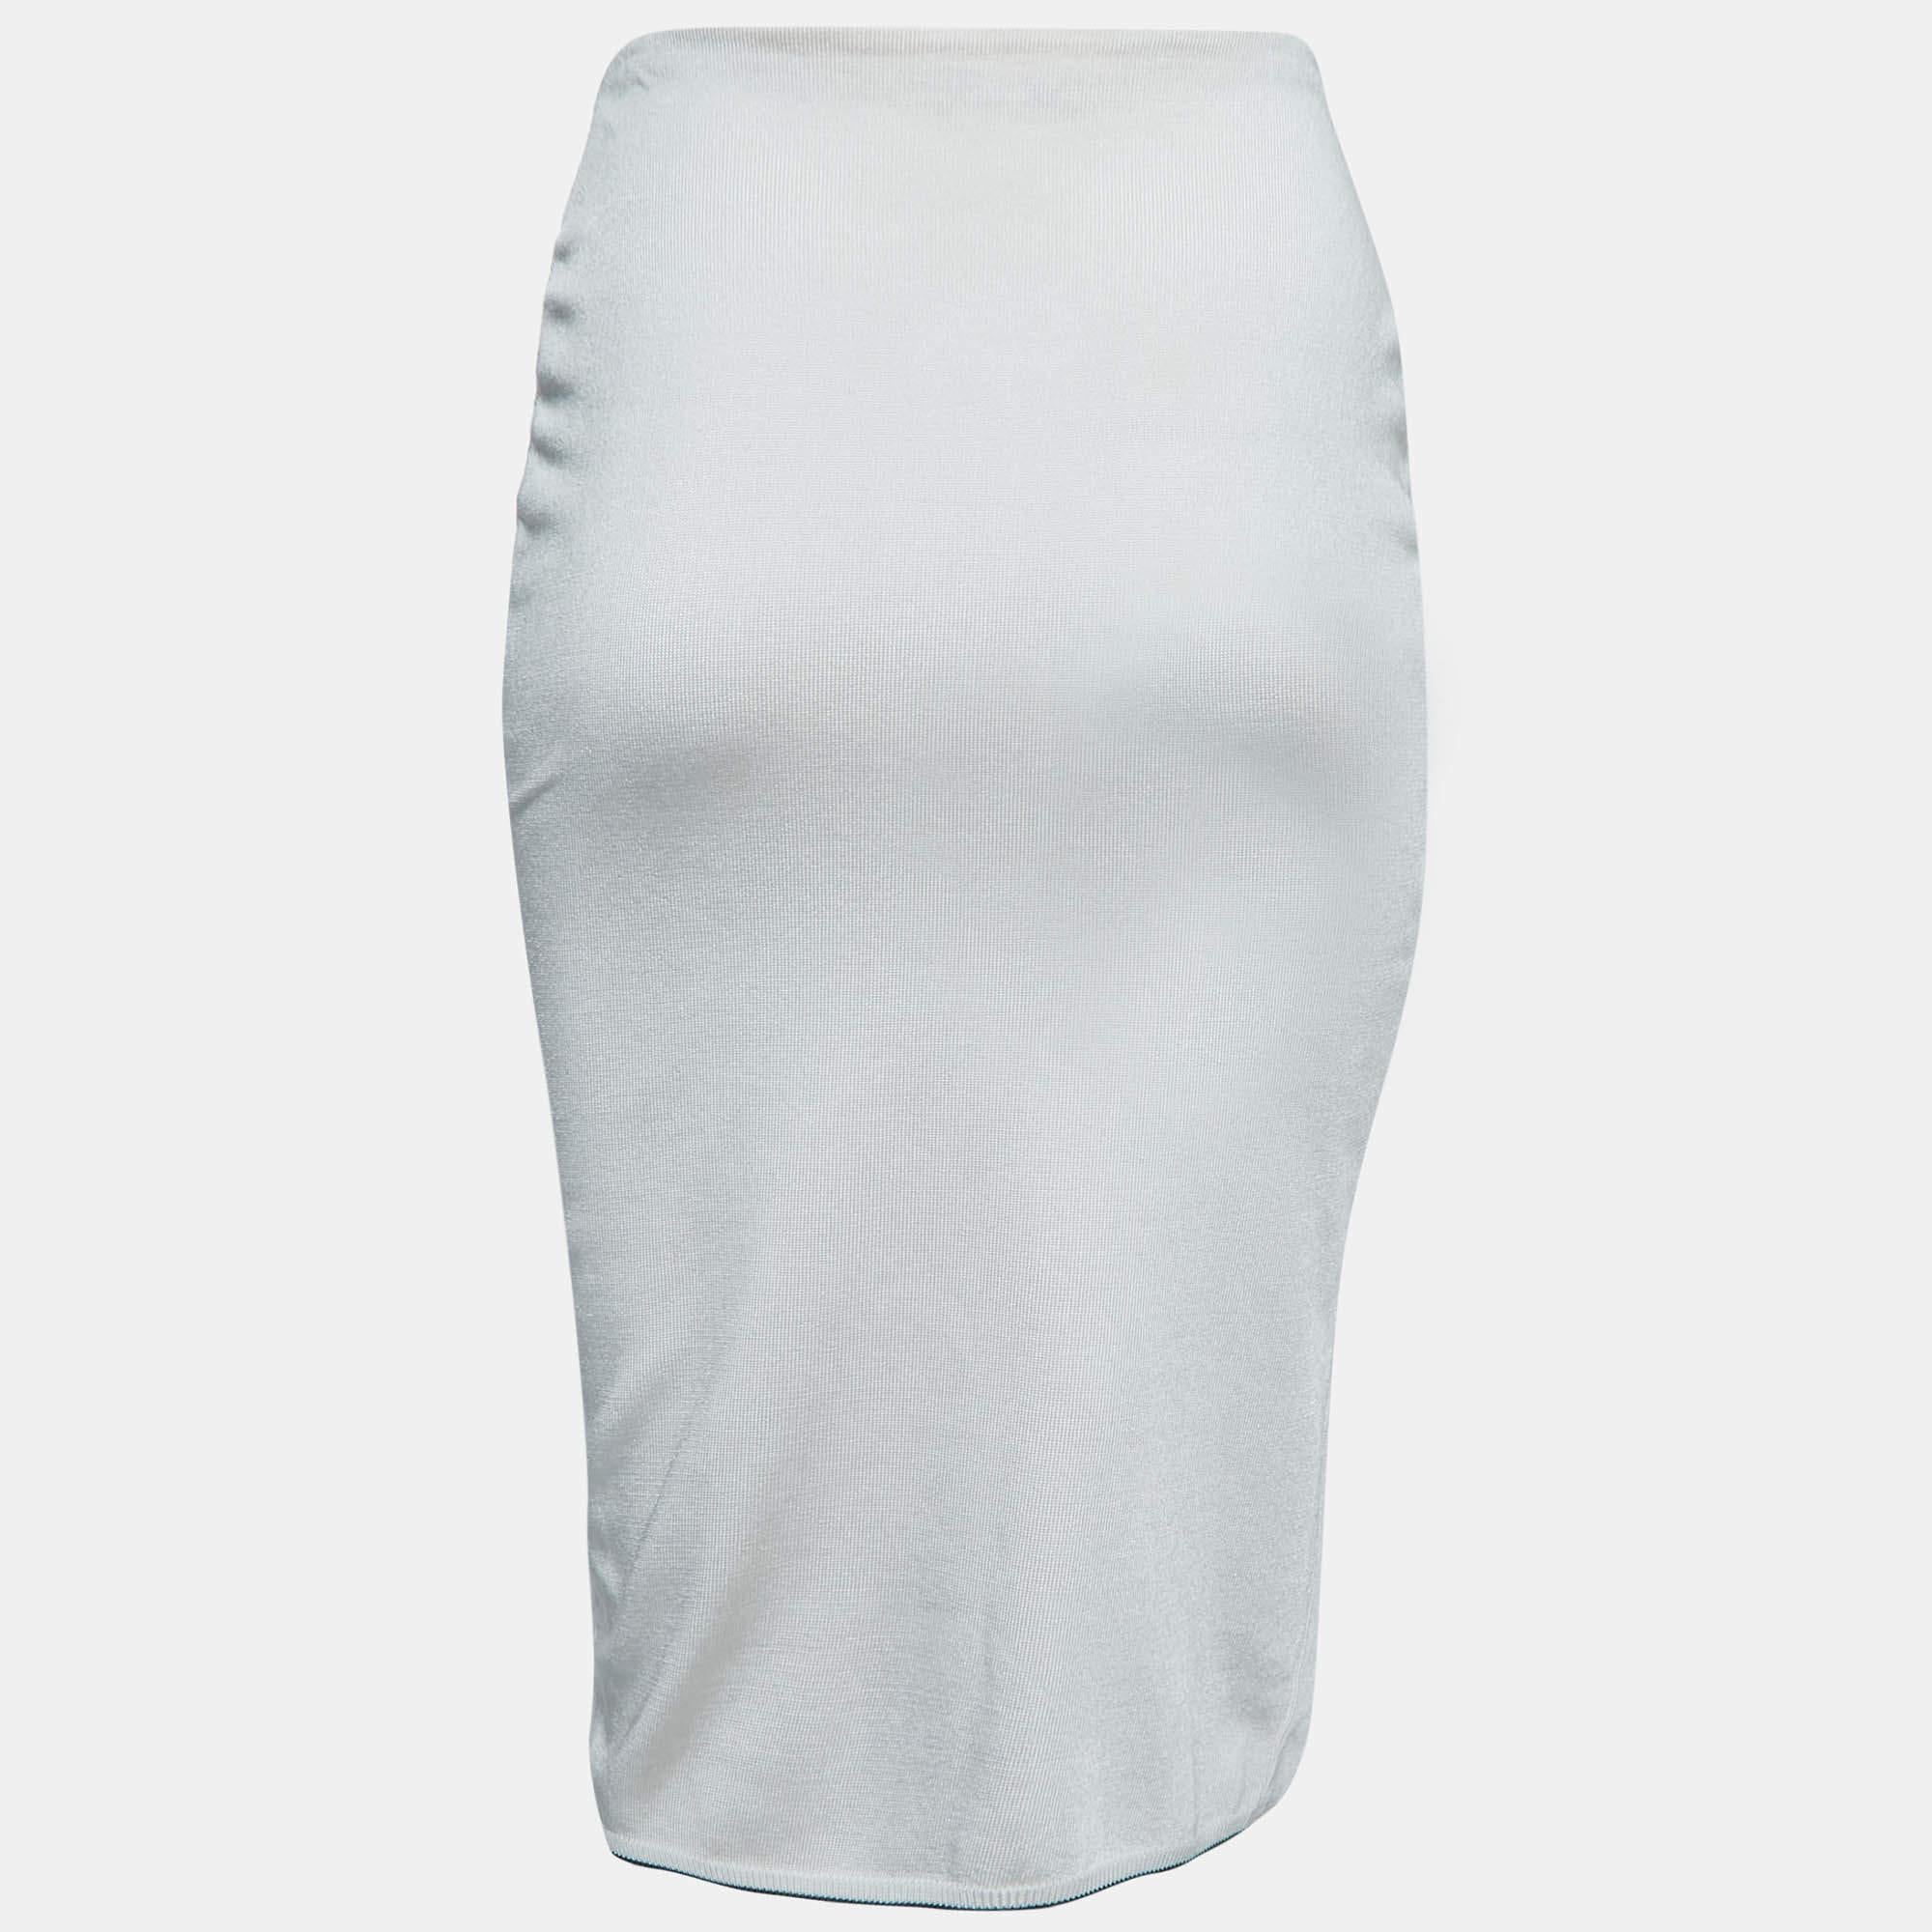 From the house of Prada comes this fabulous pencil skirt beautifully tailored to become a closet favorite. Made from knit fabric, the skirt has a hem ending just below the knees.

